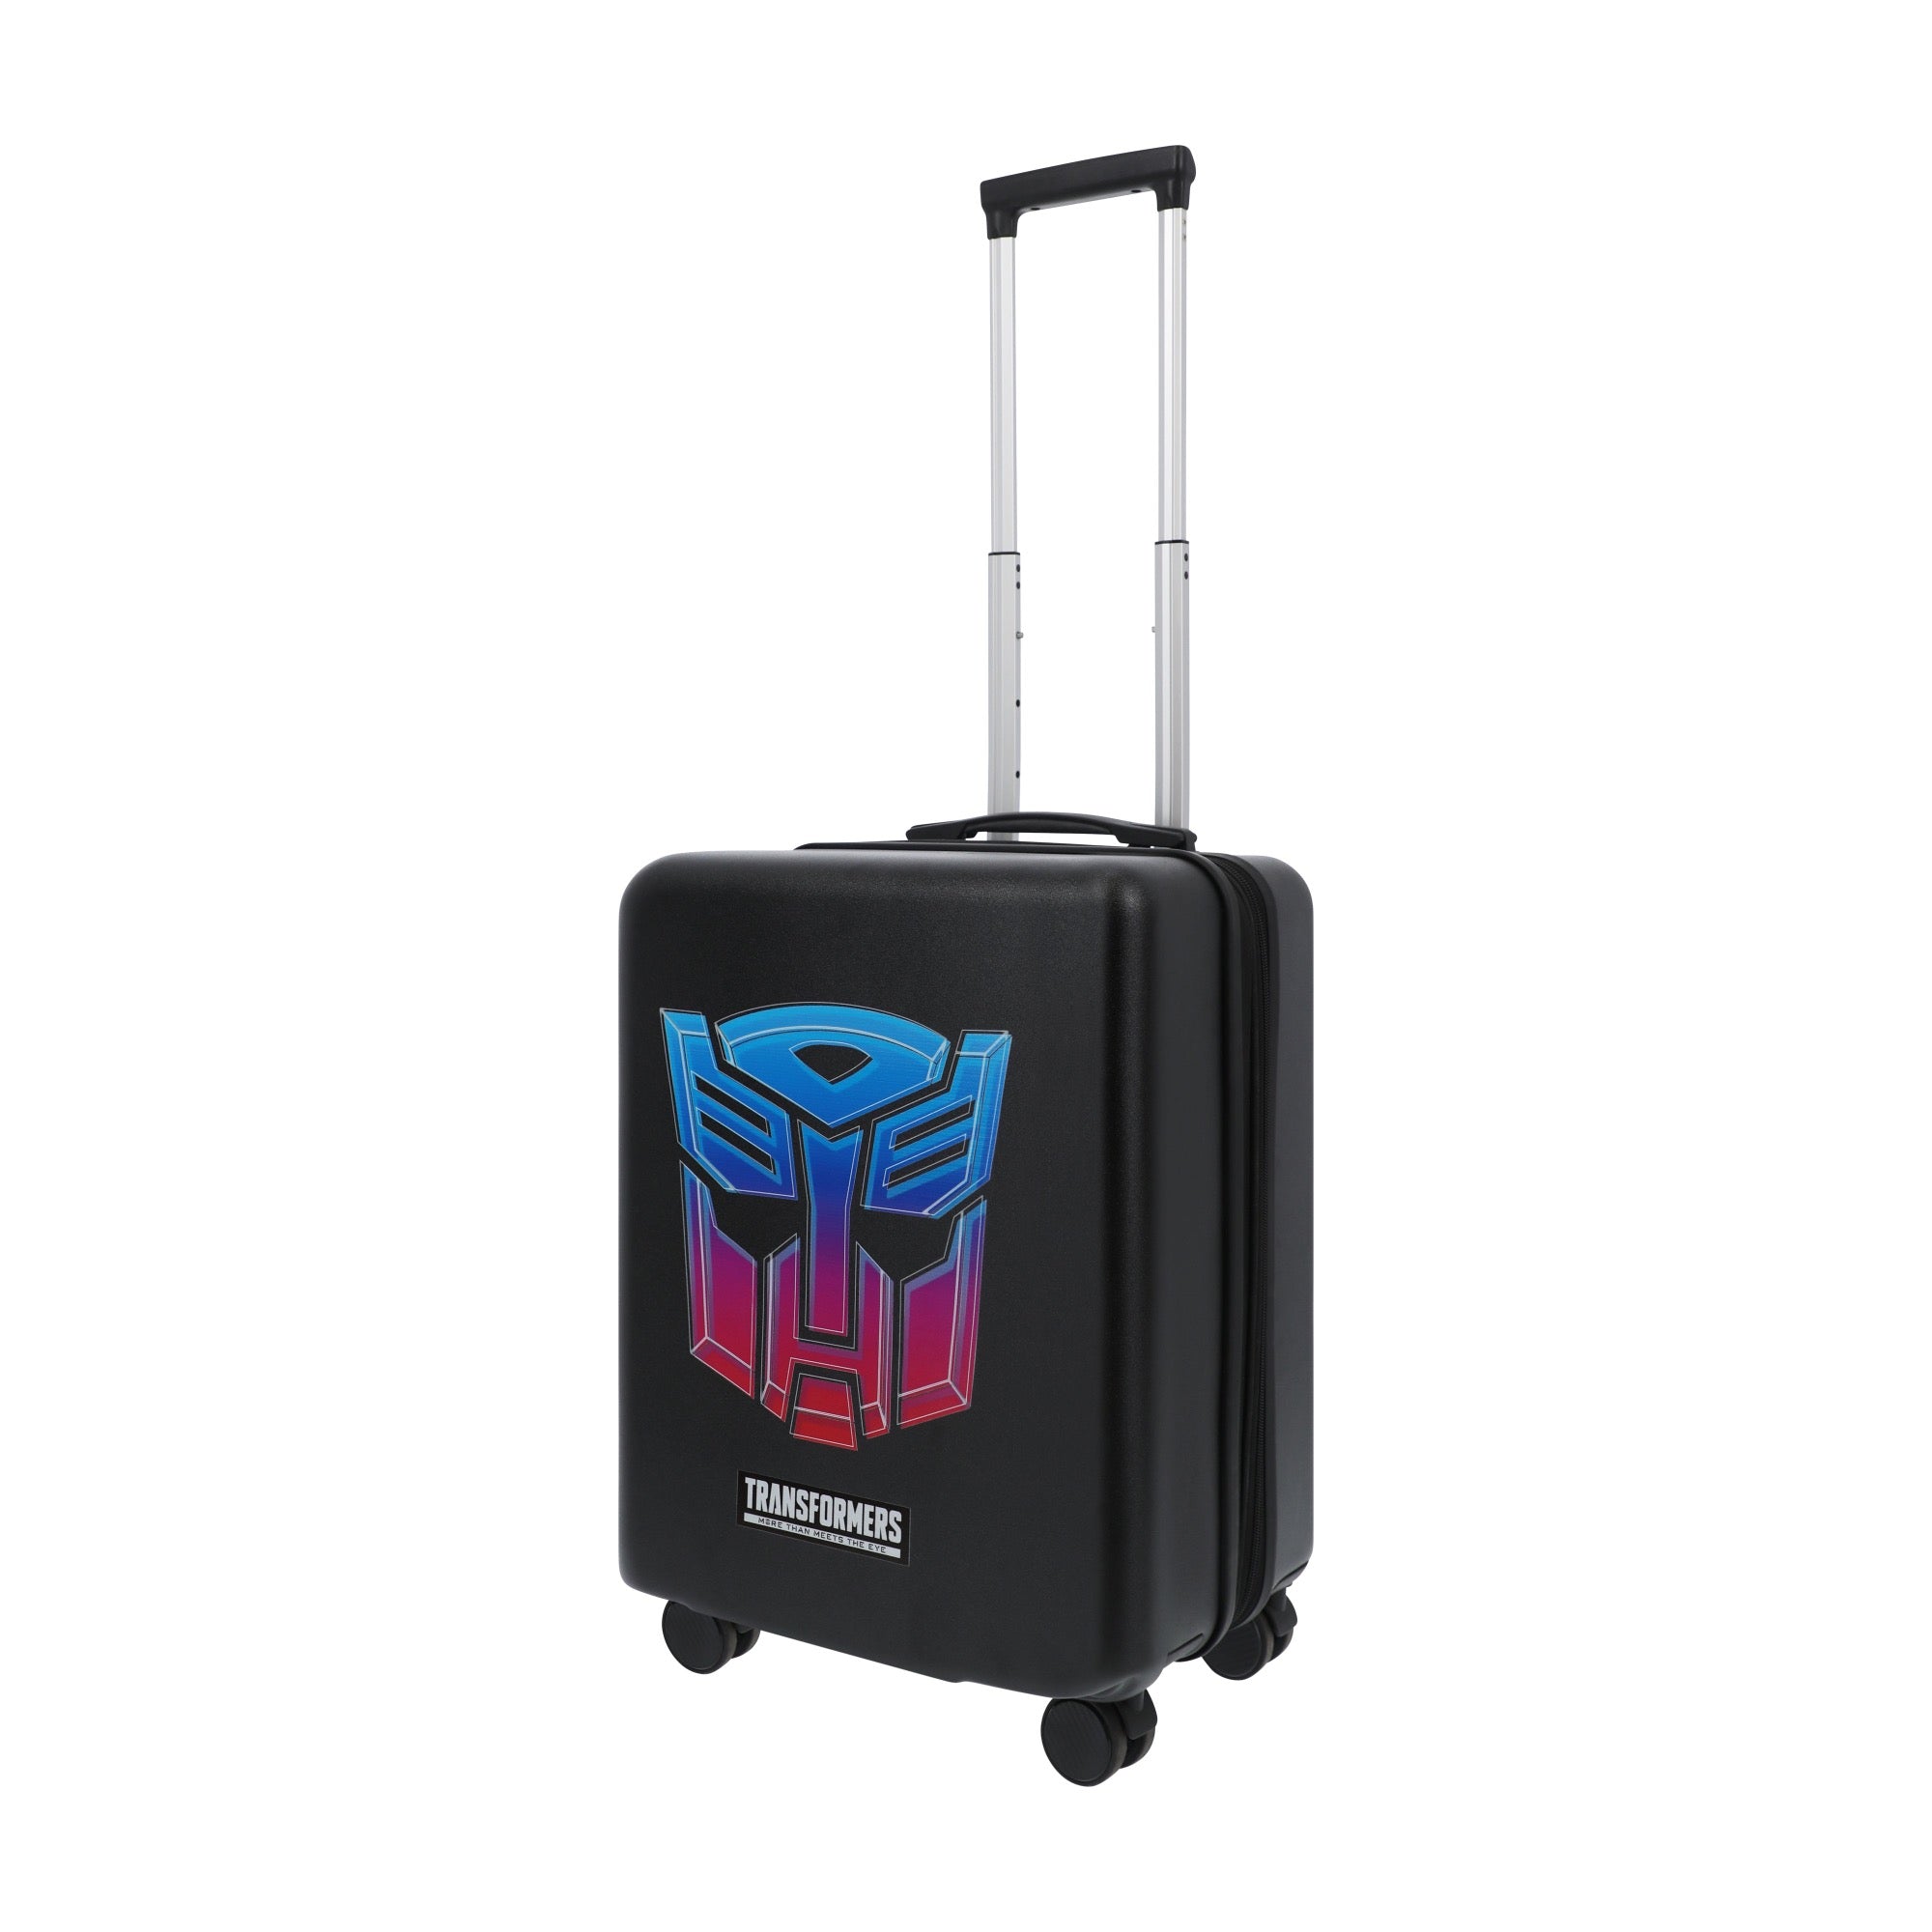 Black hasbro transformers 22.5" carry-on spinner suitcase luggage by Ful